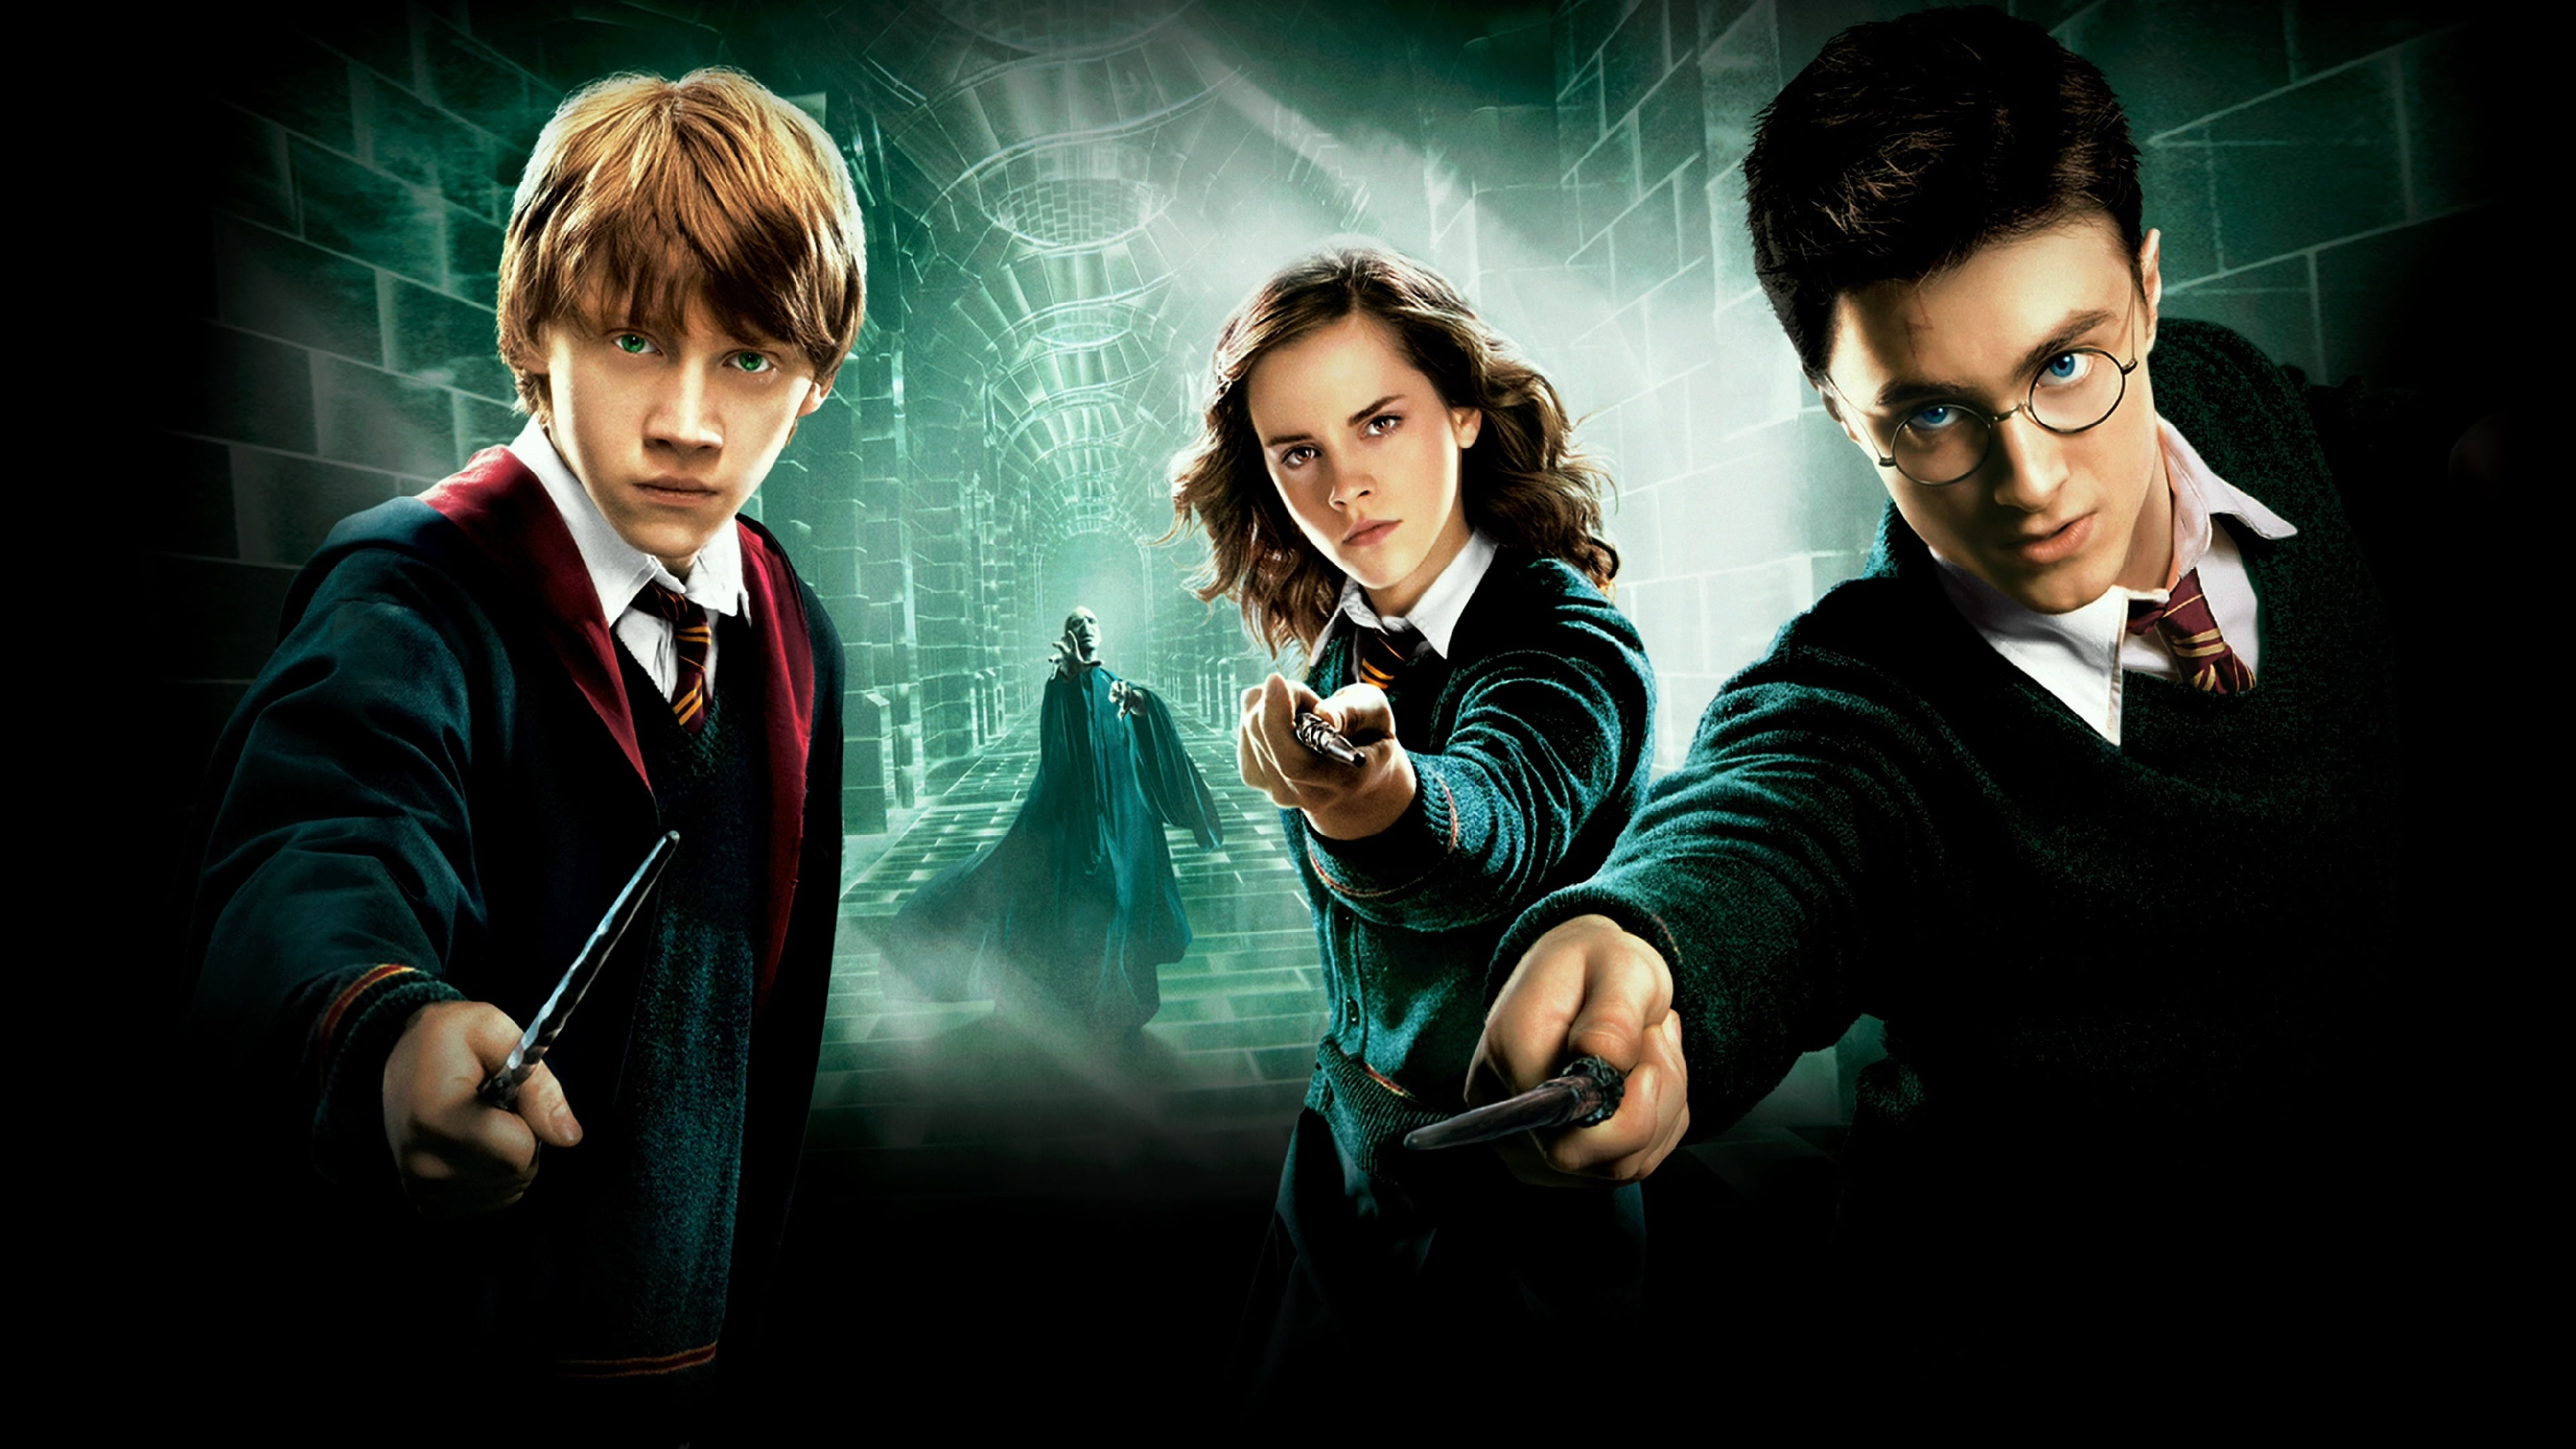 Harry Potter and the Order of the Phoenix (2007) 123 Movies Online